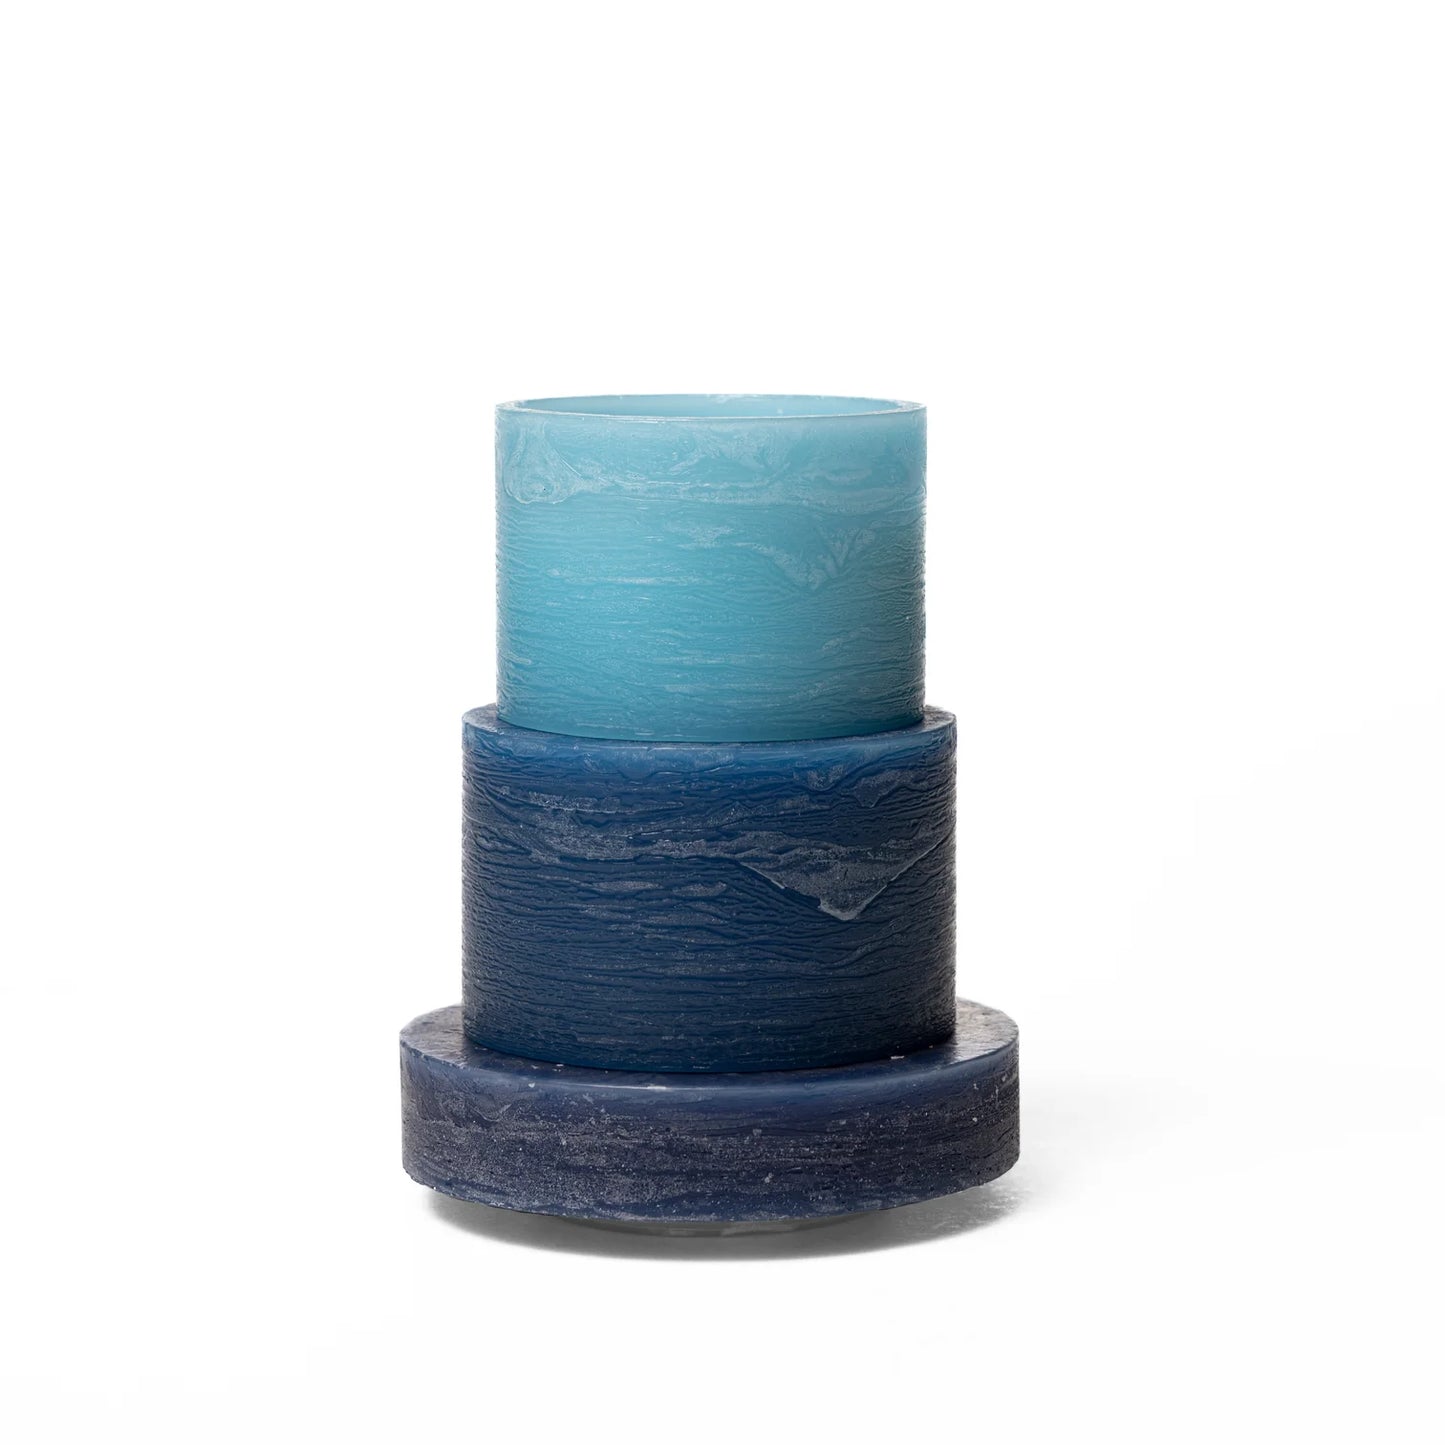 A blue 3-layered stacked candle